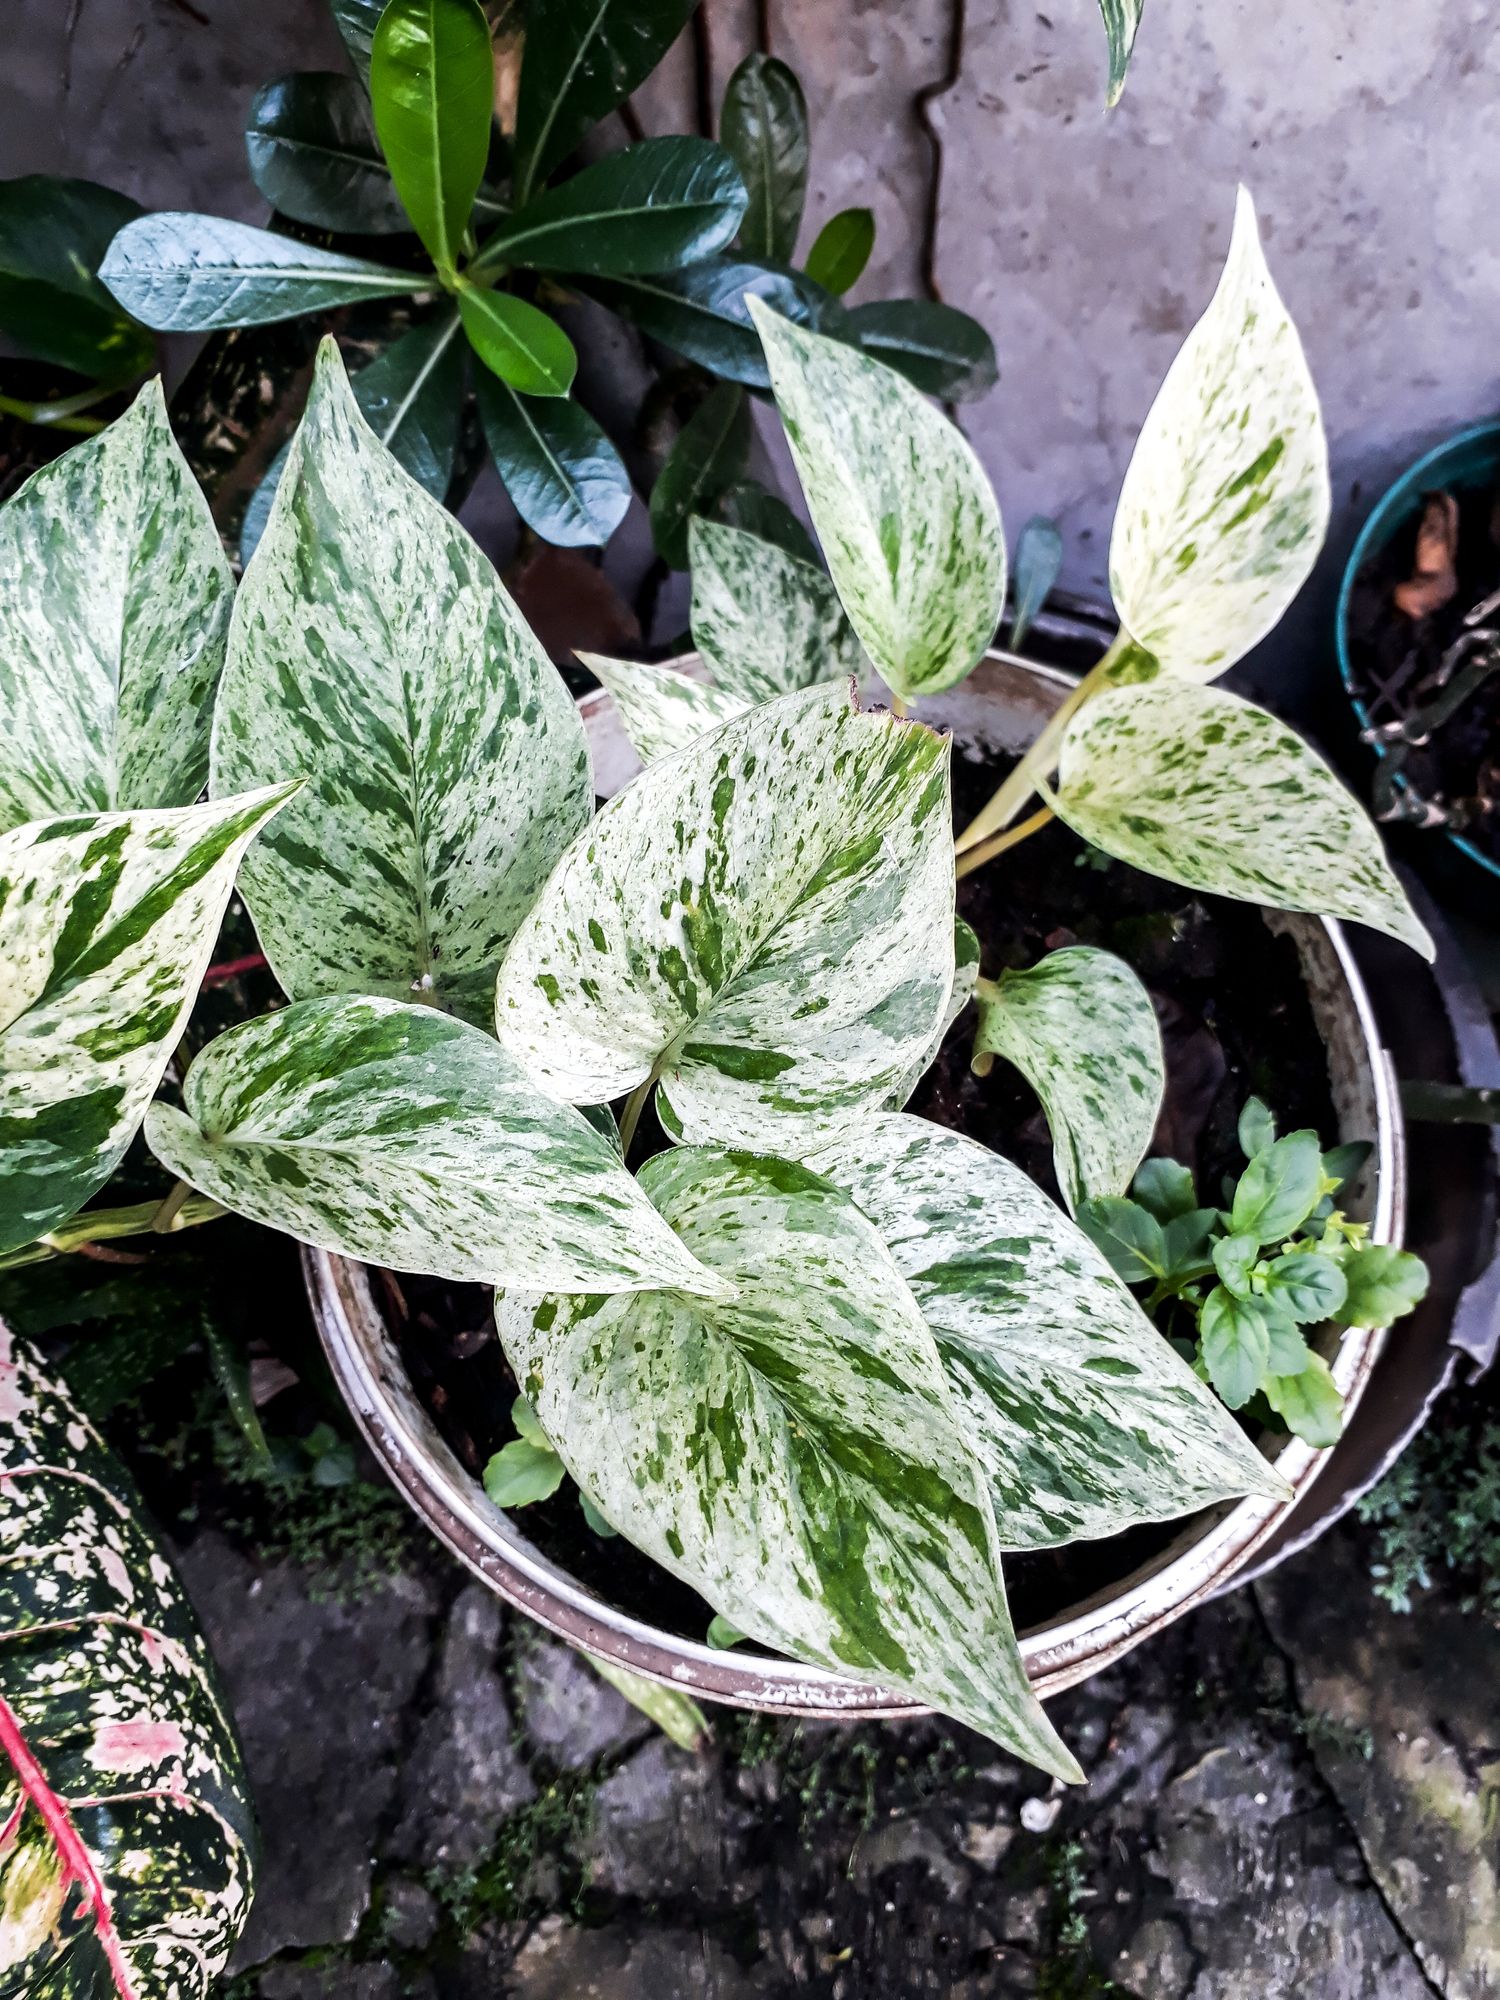 What houseplant has green and white leaves?